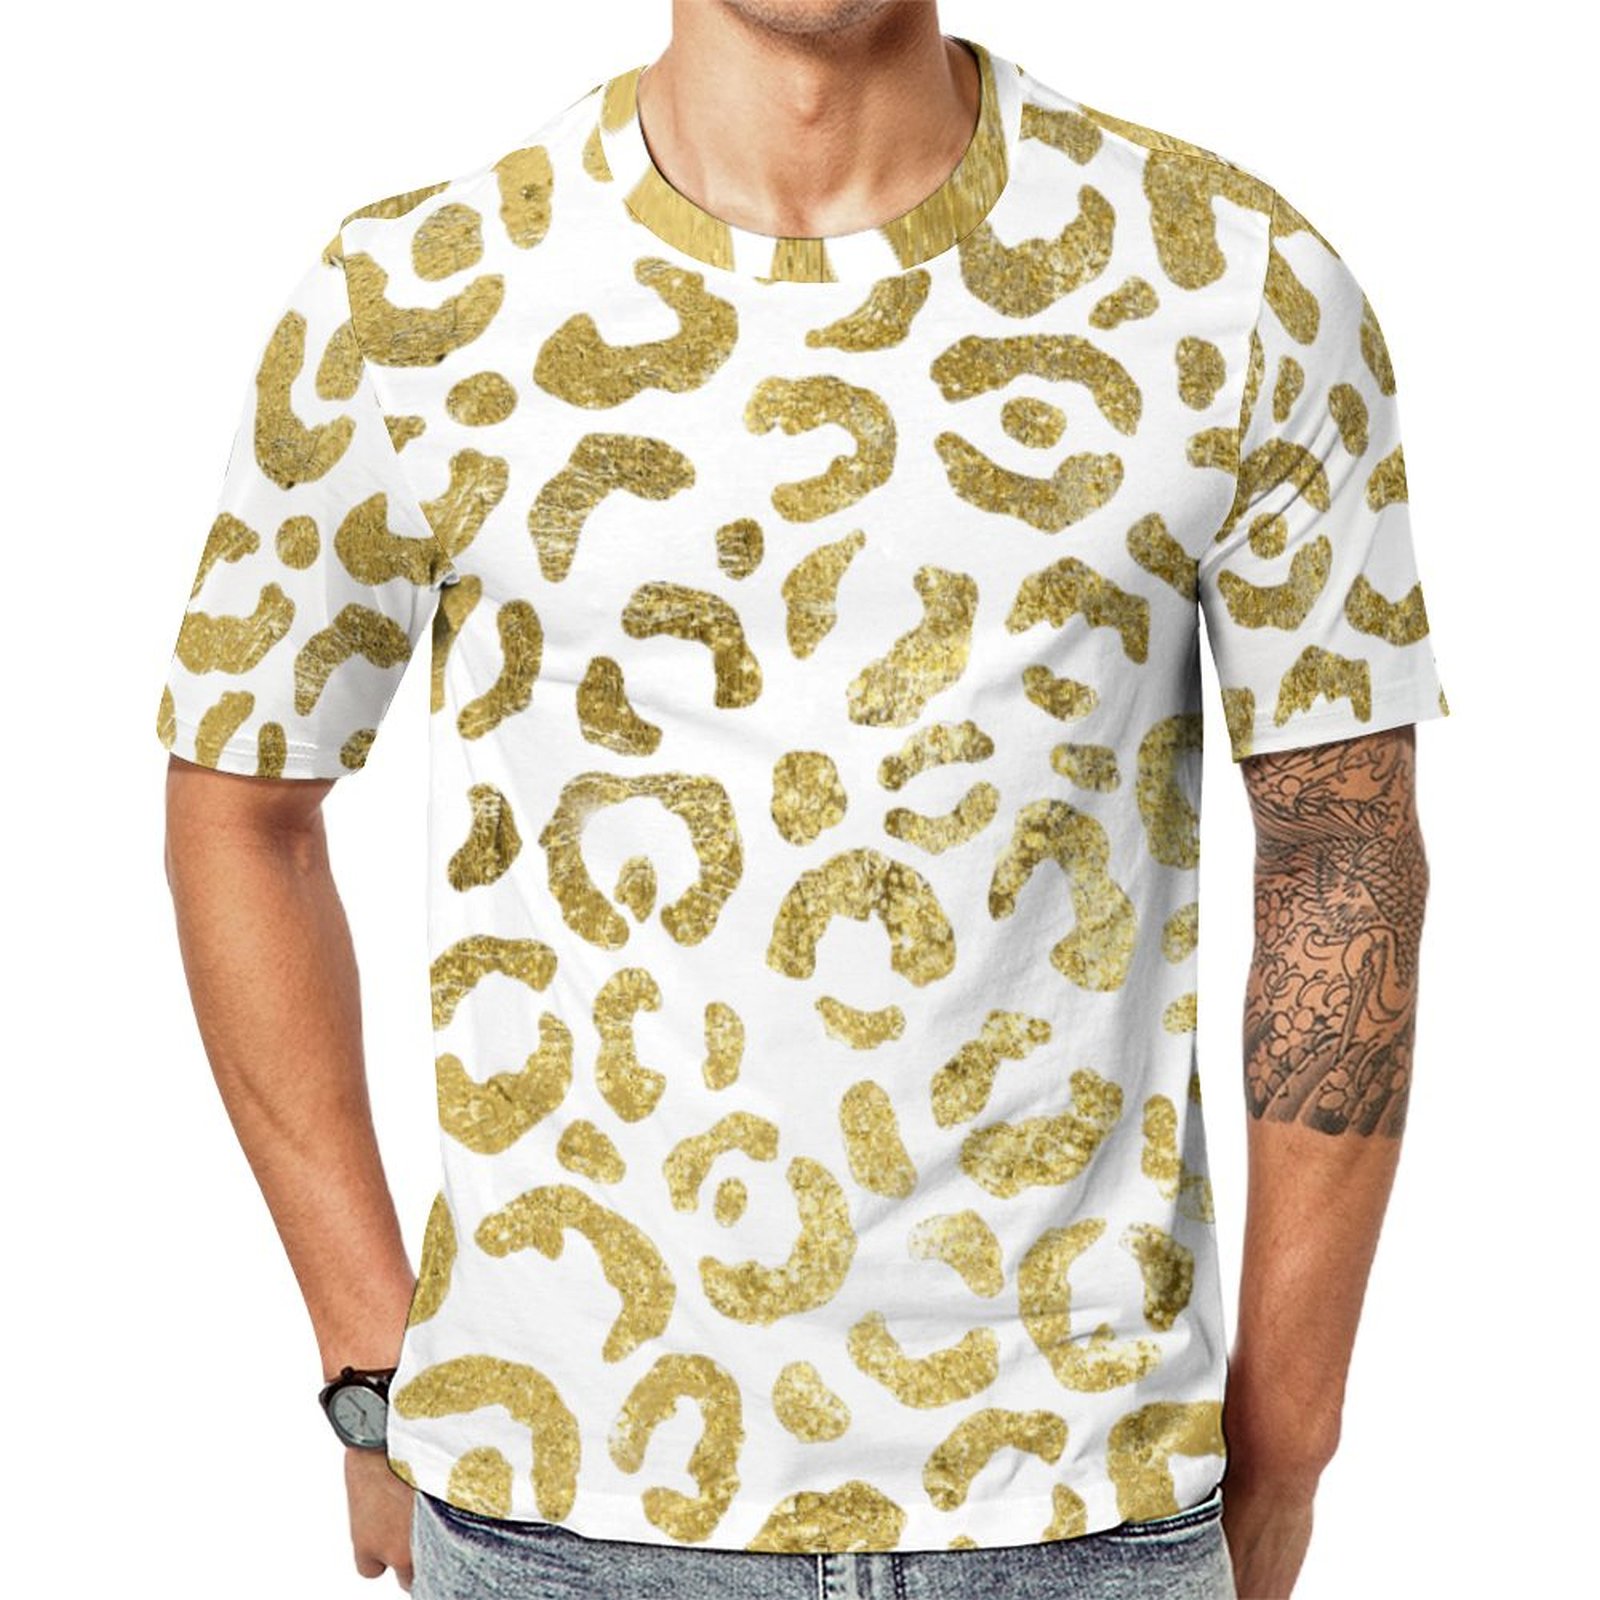 Gold White Leopard Spots Short Sleeve Print Unisex Tshirt Summer Casual Tees for Men and Women Coolcoshirts